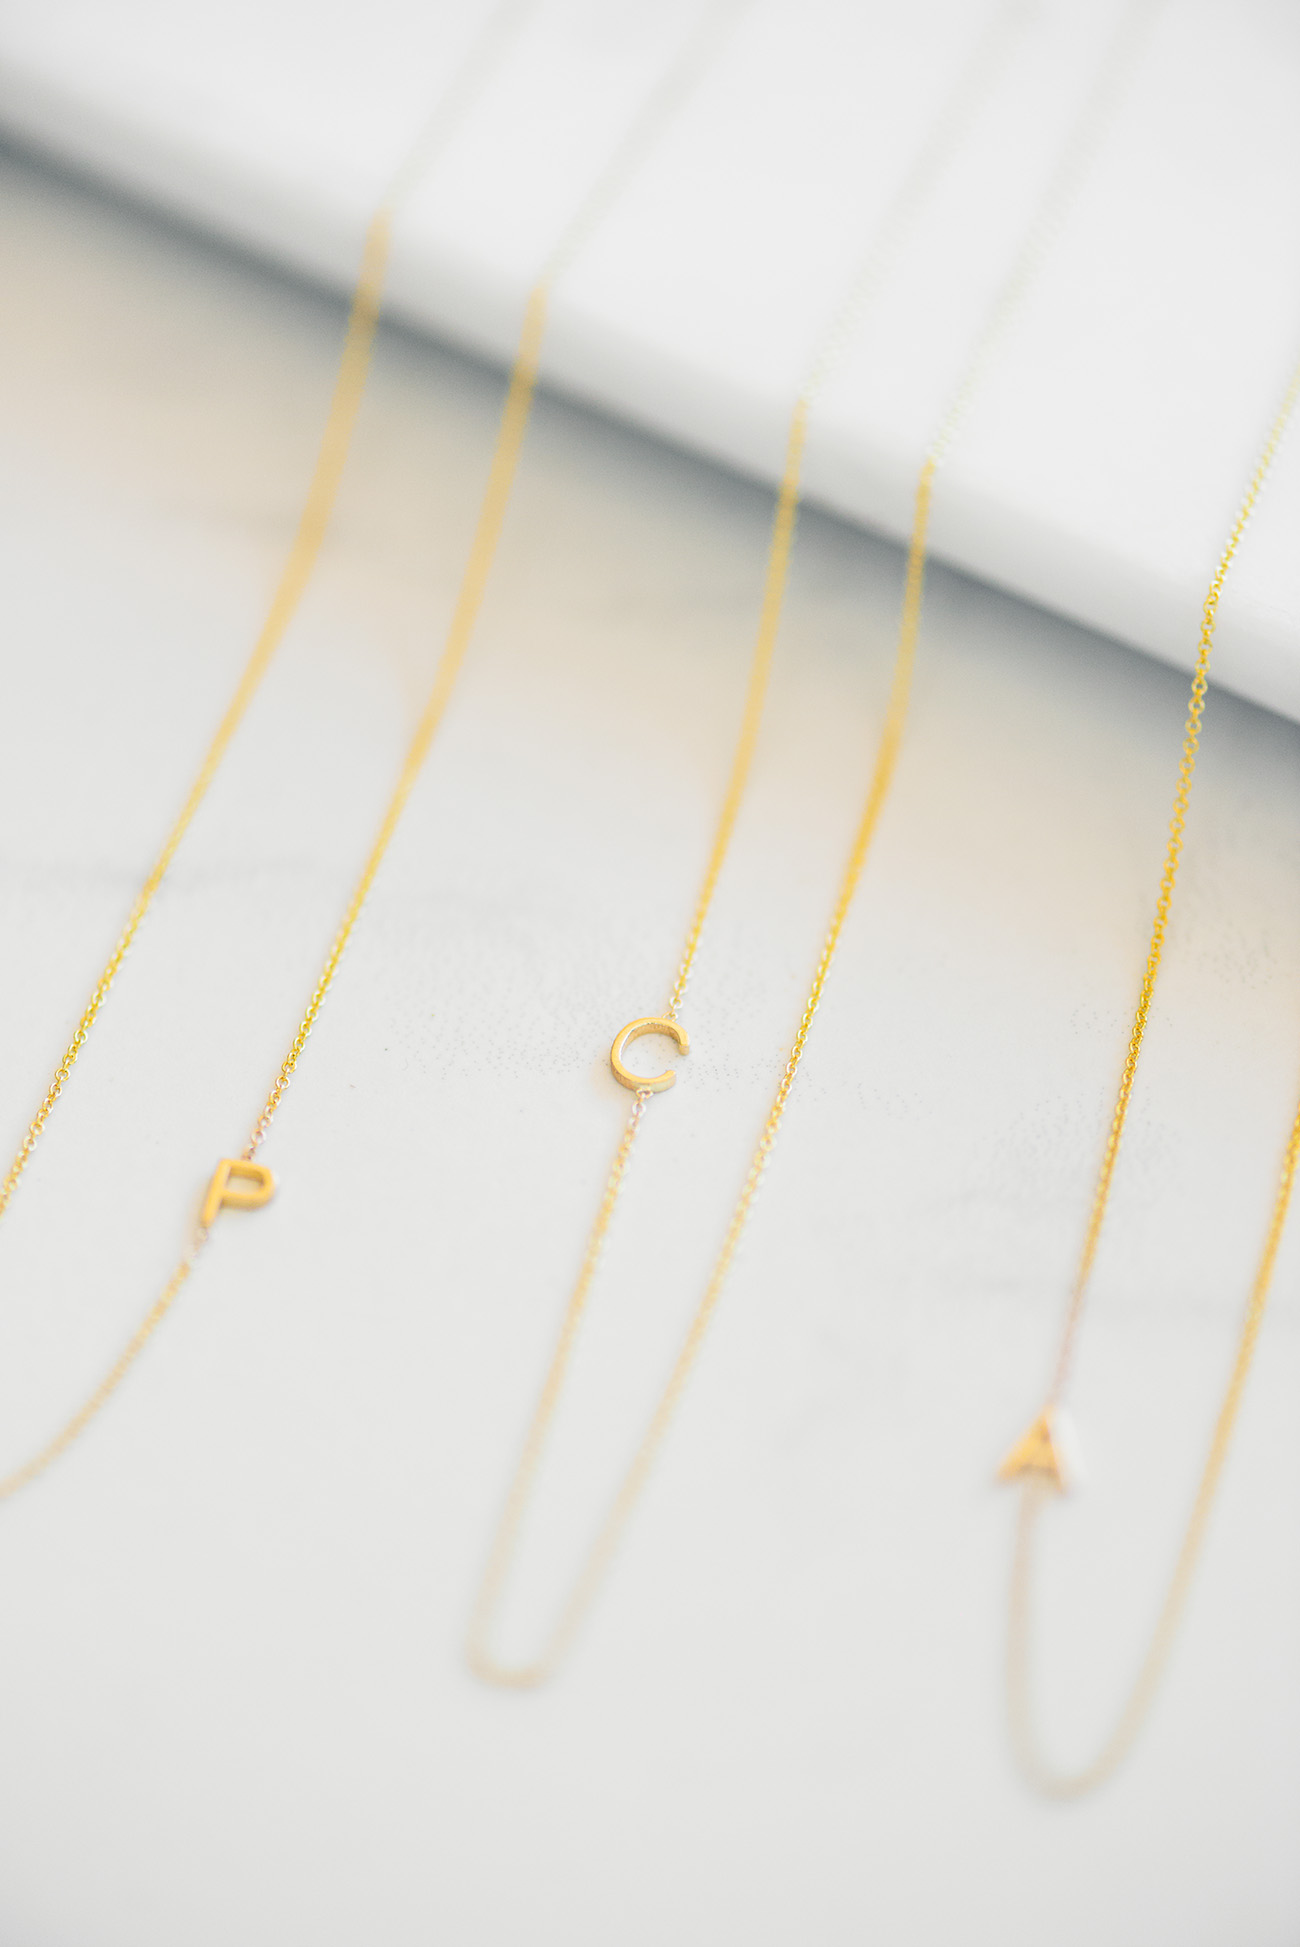 The Most Darling + Dainty Necklaces from Maya Brenner + a *GIVEAWAY*